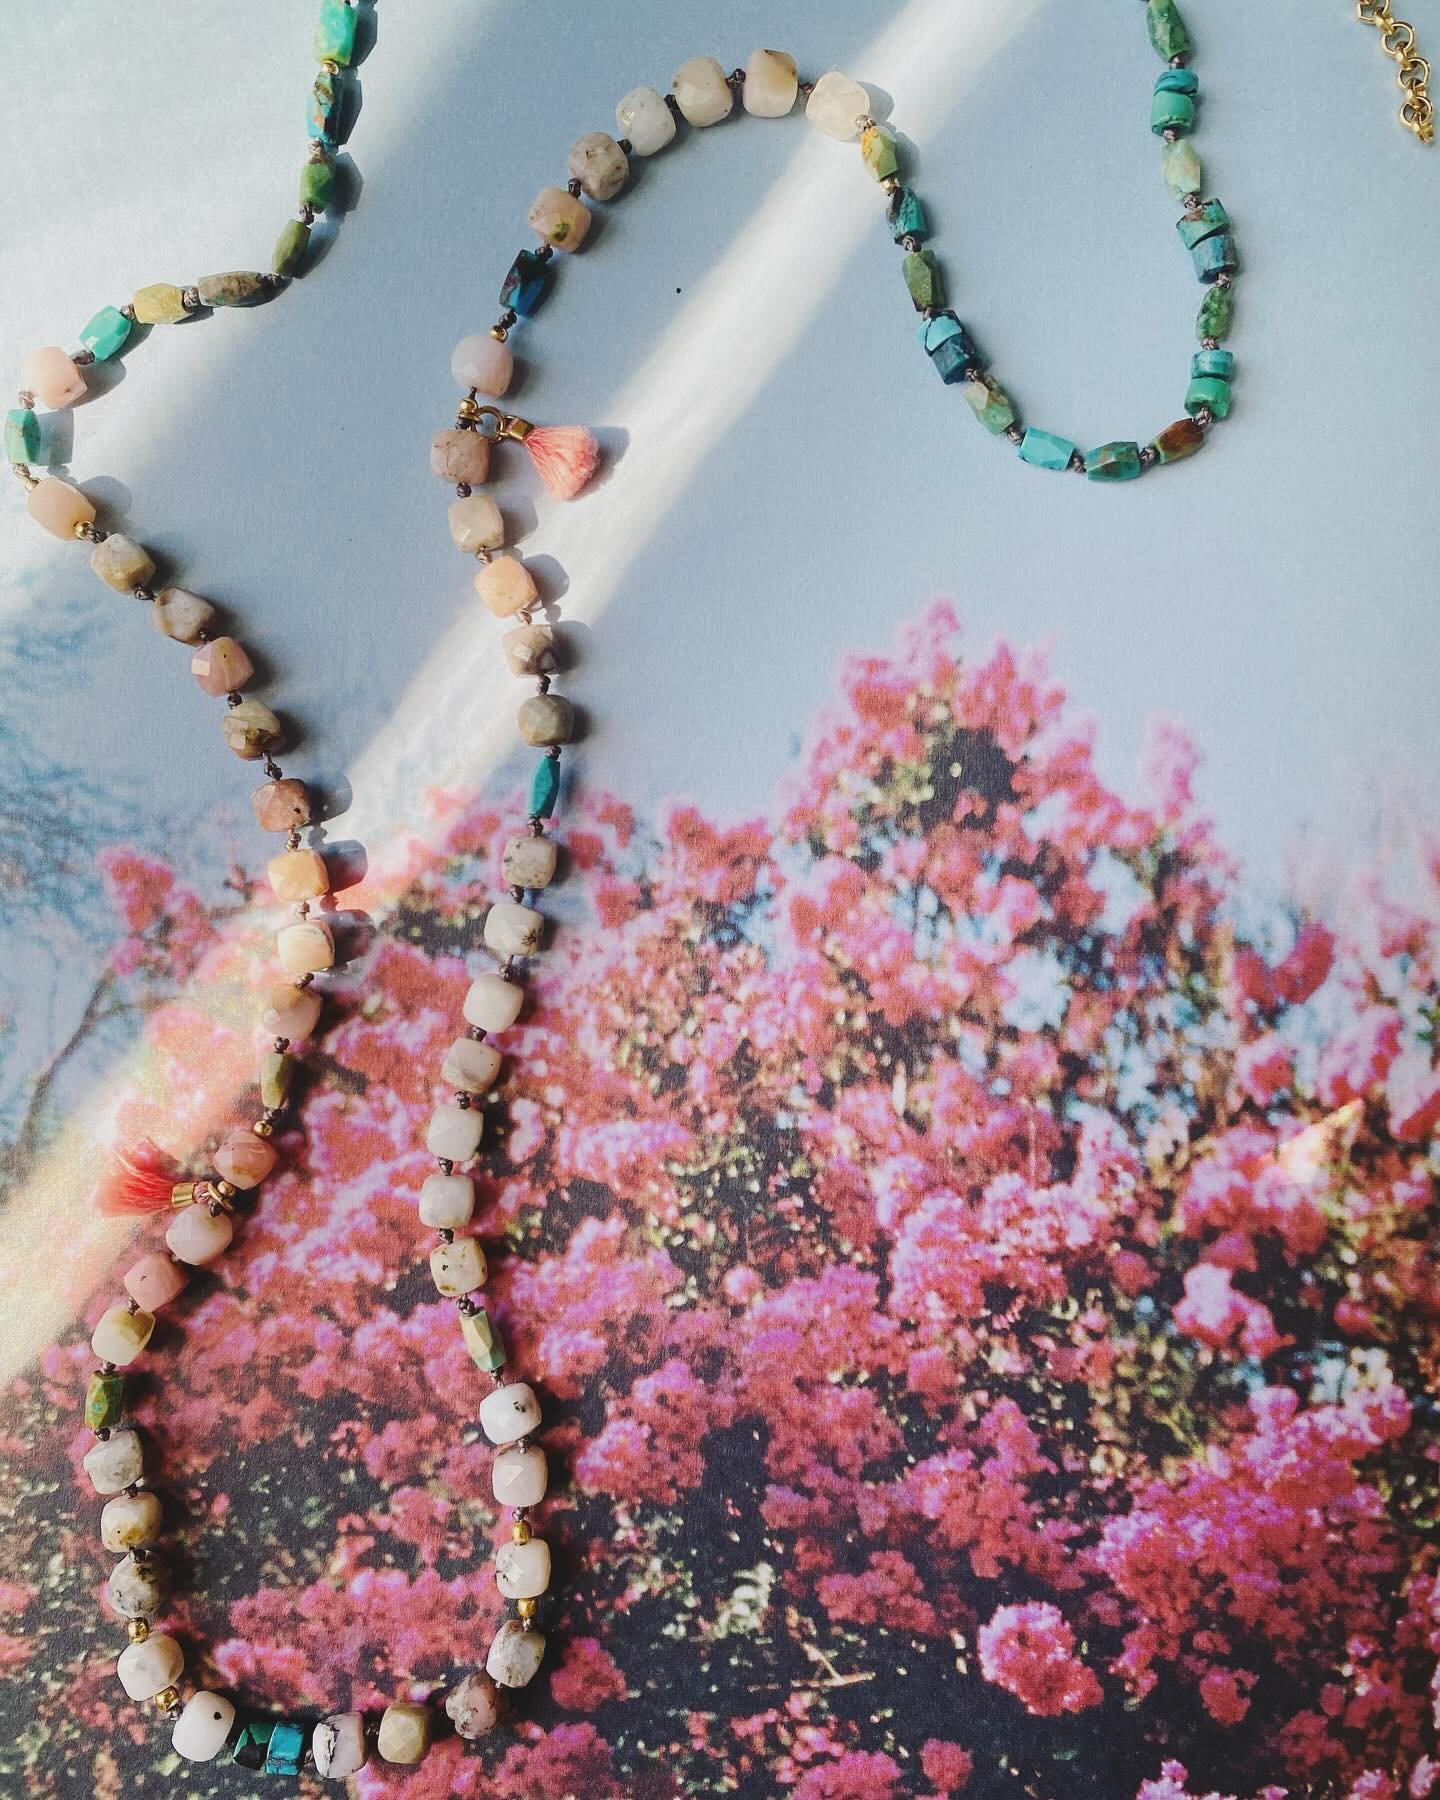 spring in all it&rsquo;s beauty!! bring it on!! 

#hellosunshine 
#naturalbeauty
#gemstones
#turquoise 
#pinkopal